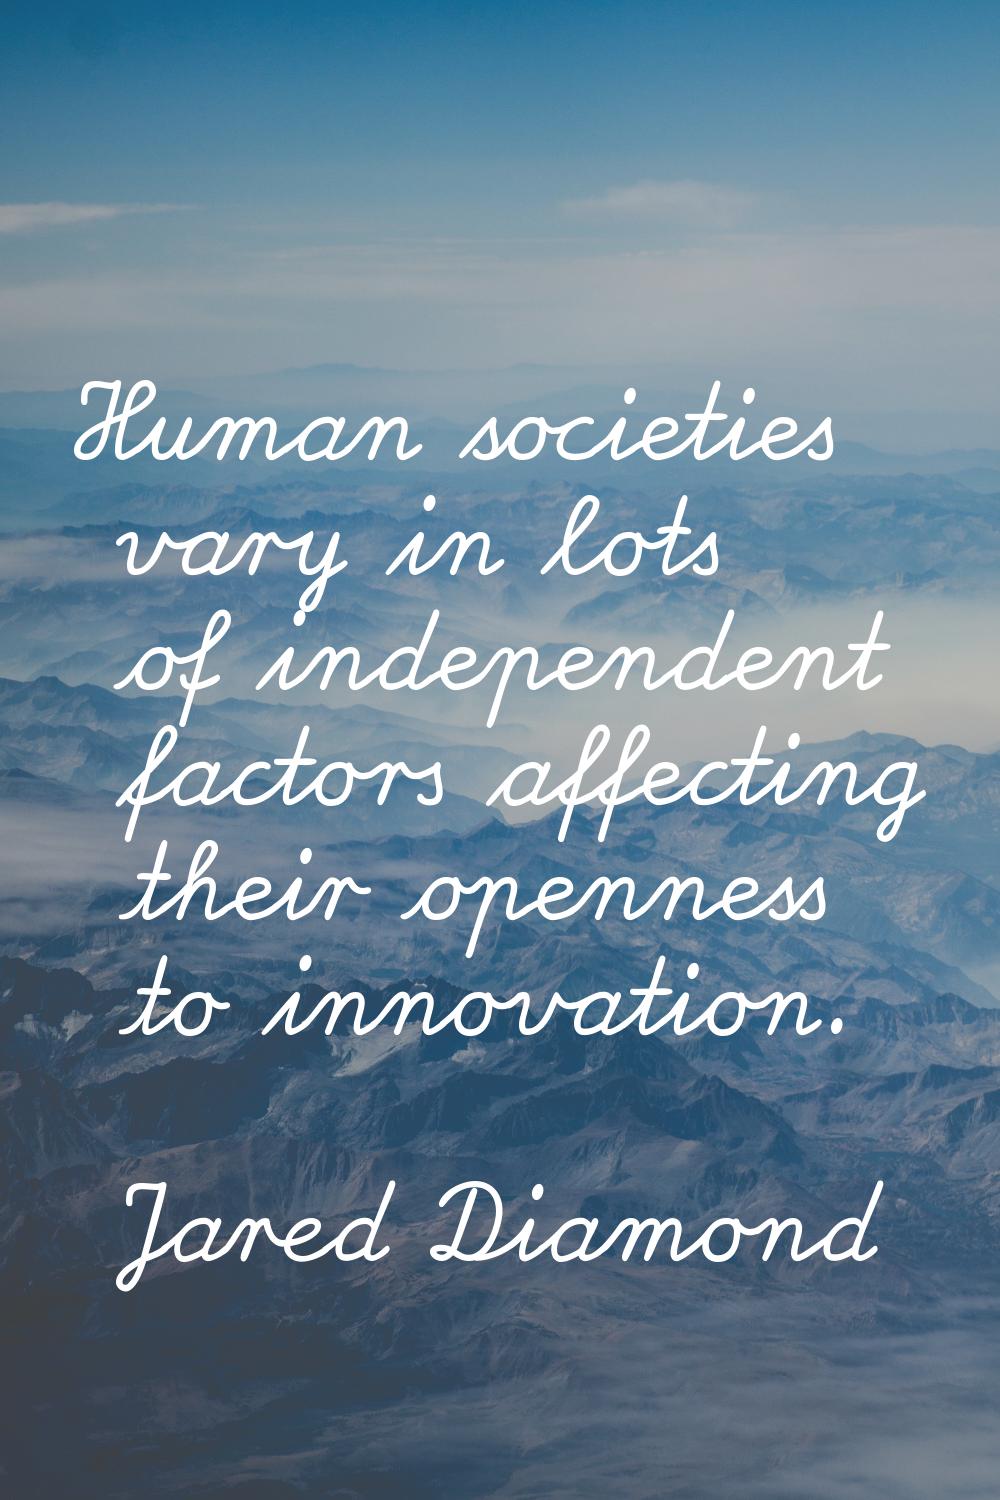 Human societies vary in lots of independent factors affecting their openness to innovation.